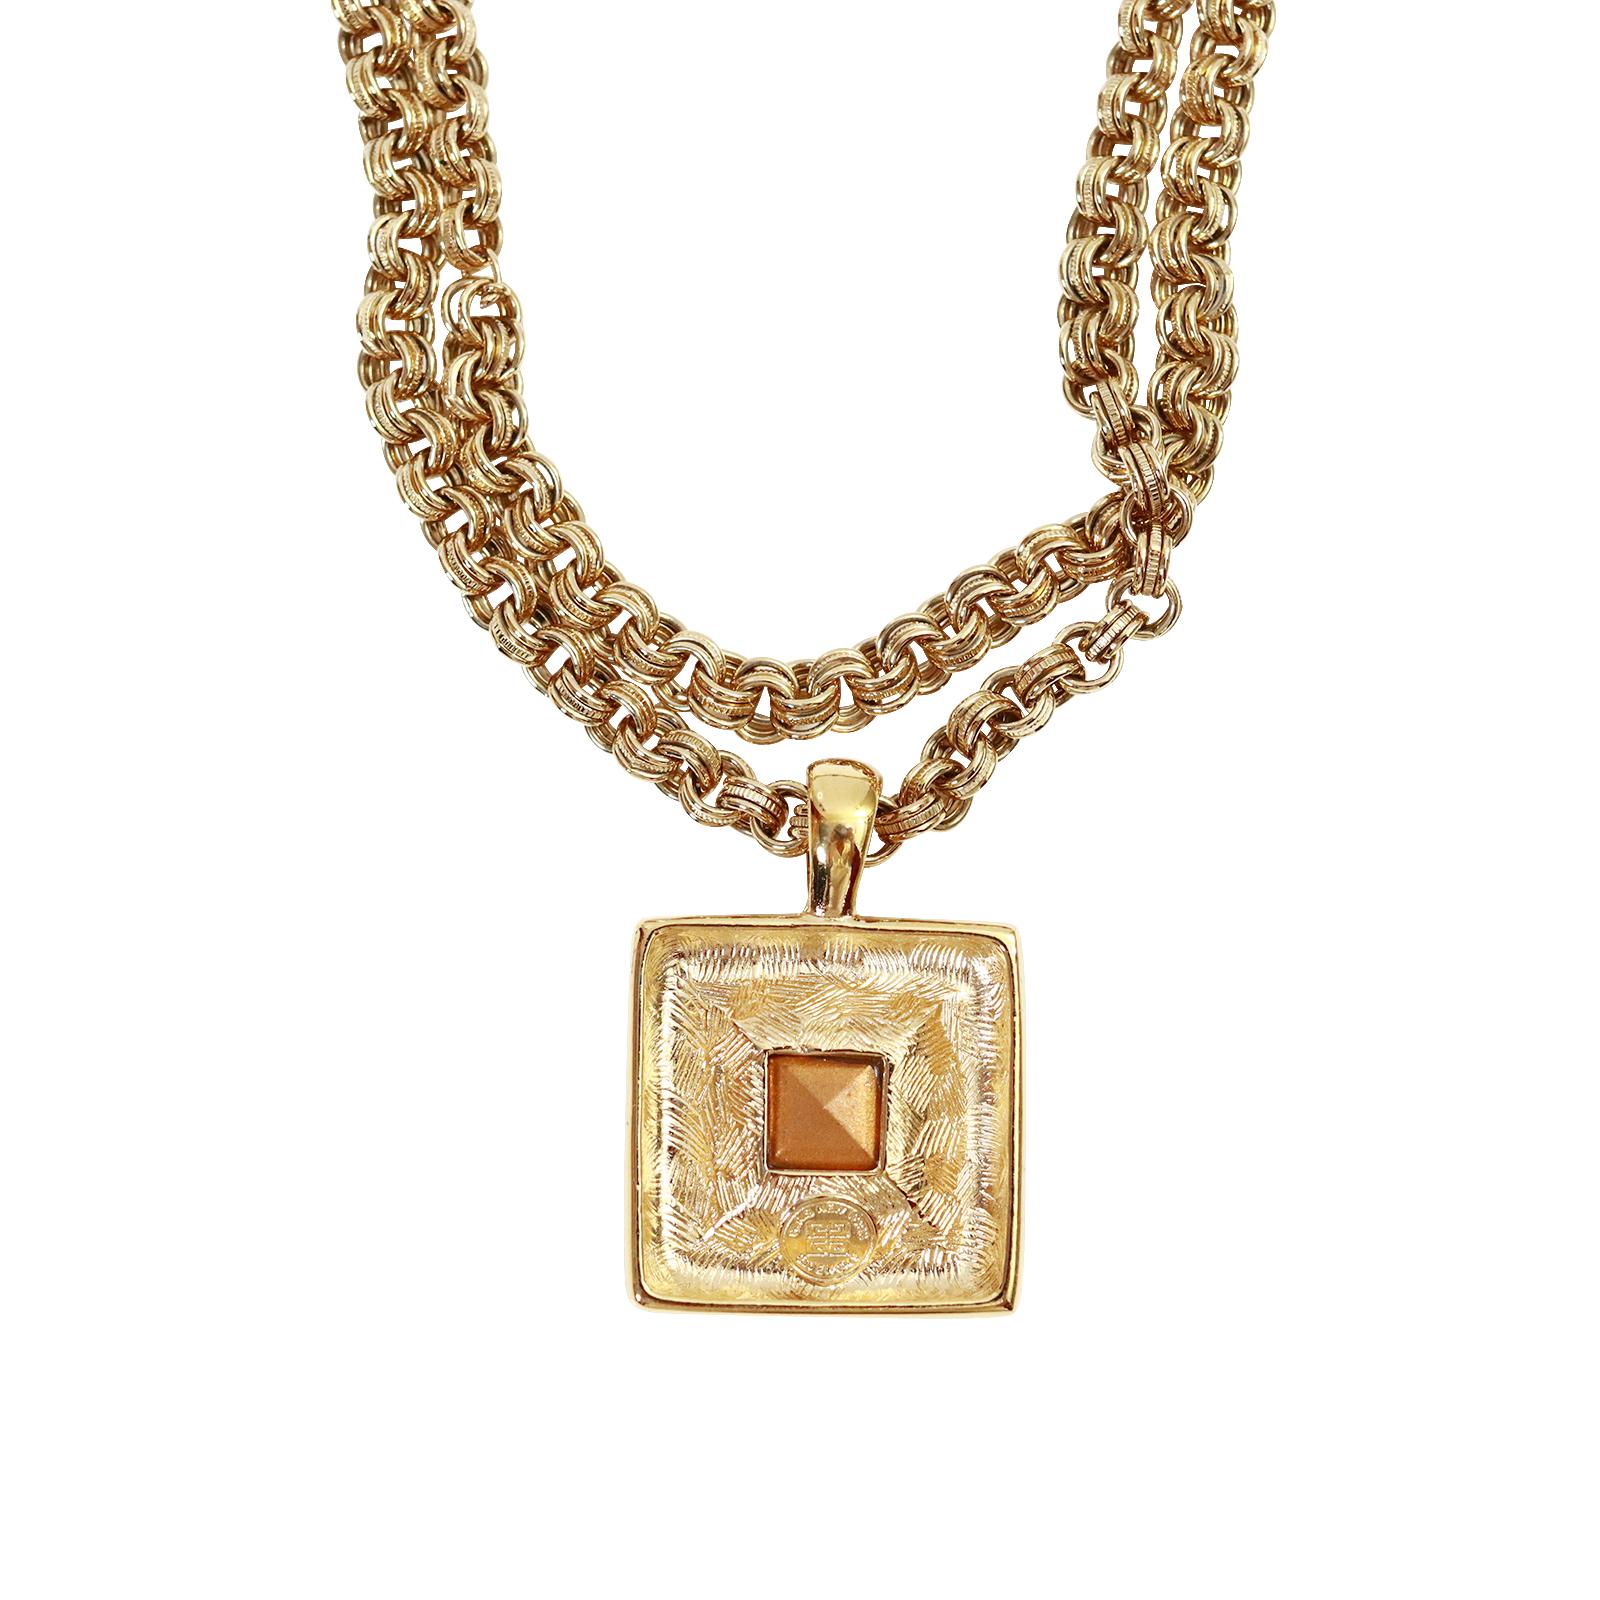 Vintage Givenchy Link Chain with Dangling Drop Necklace Circa 1980s For Sale 1